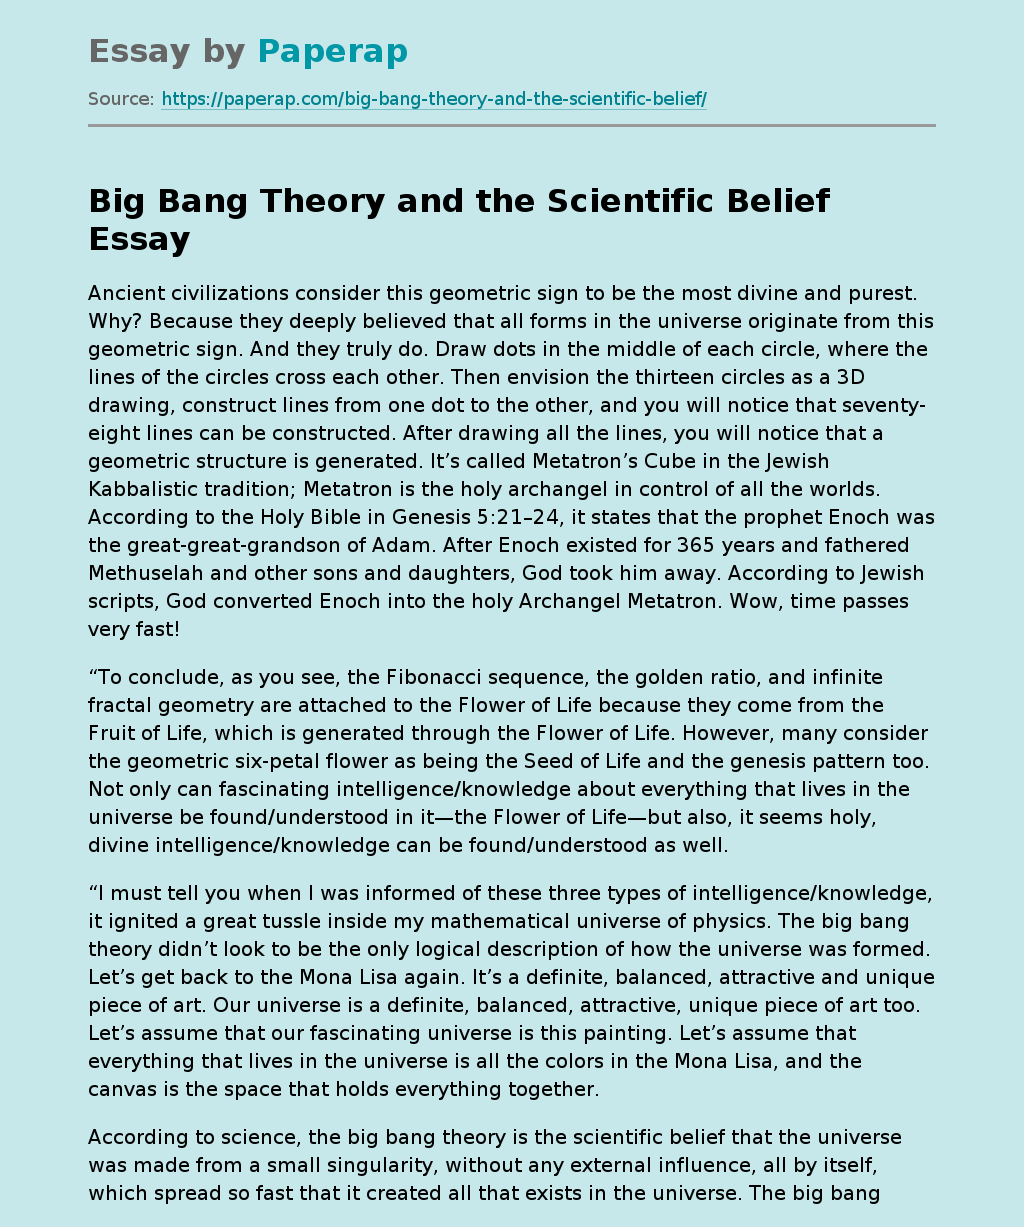 Big Bang Theory and the Scientific Belief